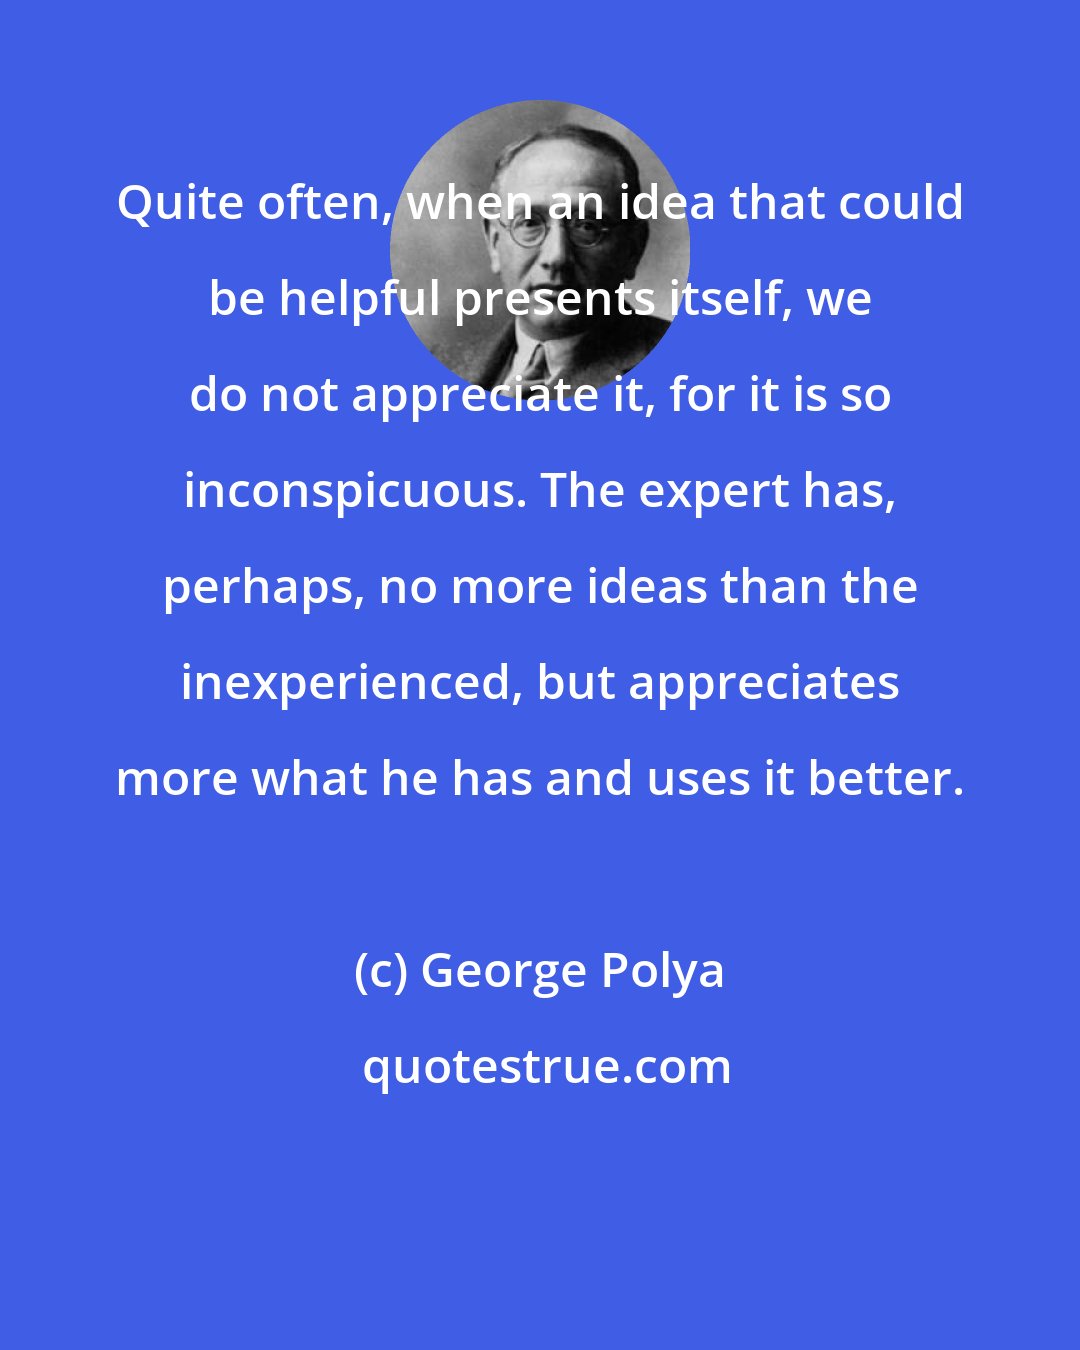 George Polya: Quite often, when an idea that could be helpful presents itself, we do not appreciate it, for it is so inconspicuous. The expert has, perhaps, no more ideas than the inexperienced, but appreciates more what he has and uses it better.